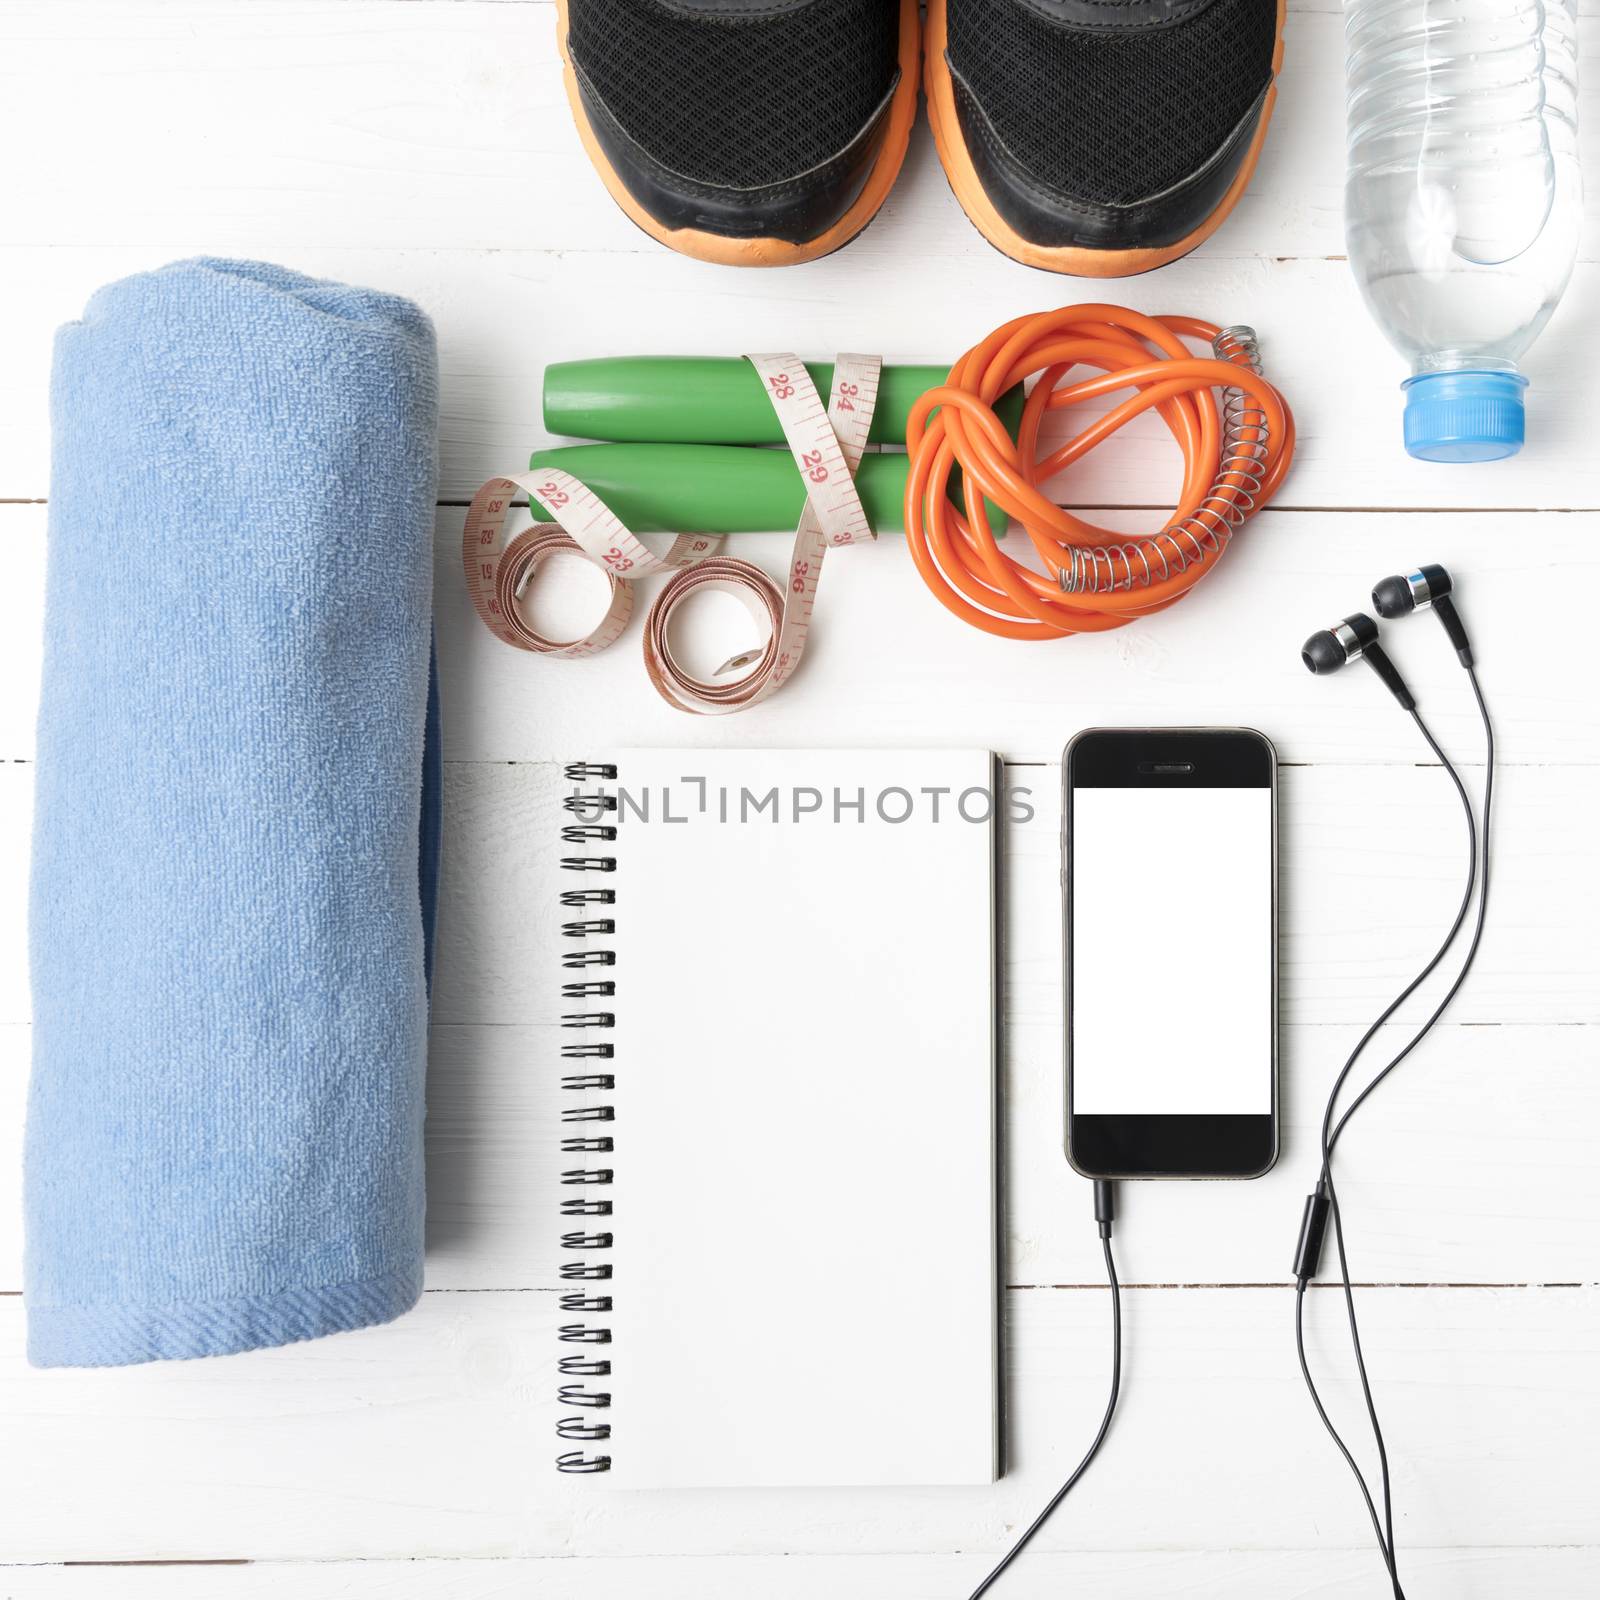 fitness equipment : running shoes,towel,jumping rope,water bottle,phone,notepad and measuring tape on white wood table